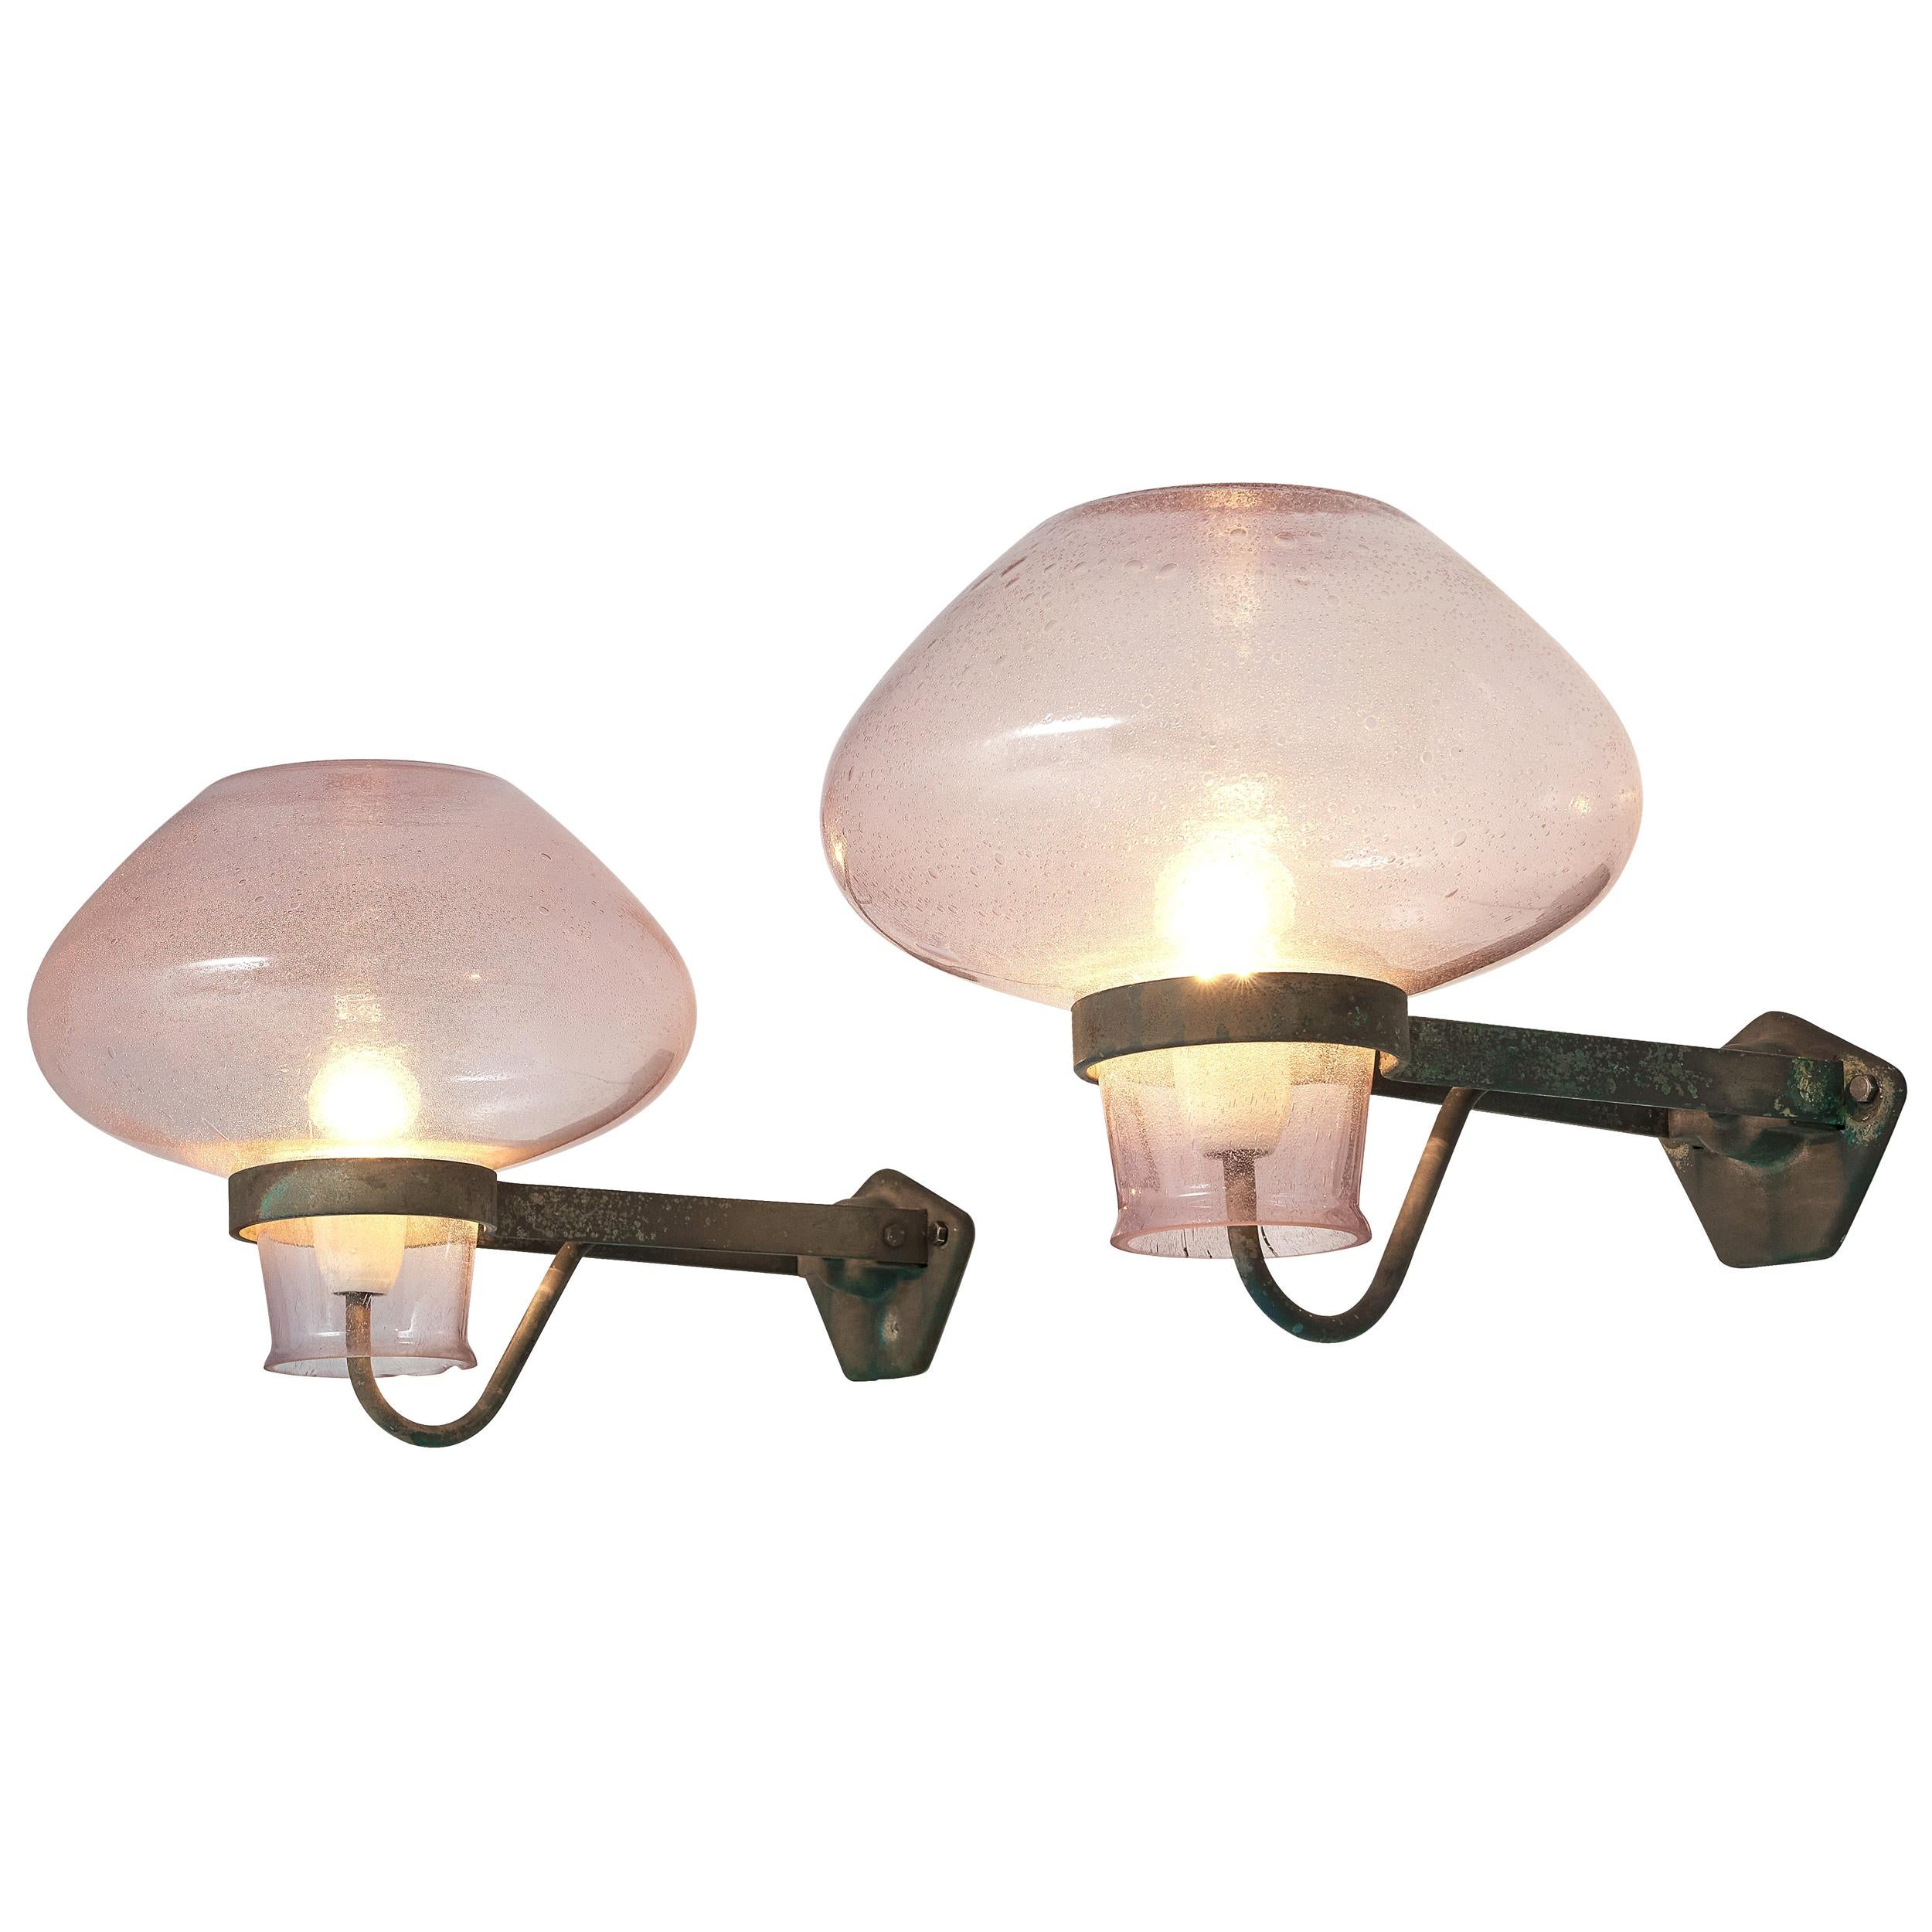 Gunnar Asplund Pair of Large Wall Lights Model 641 in Soft Pink Glass, 1930s